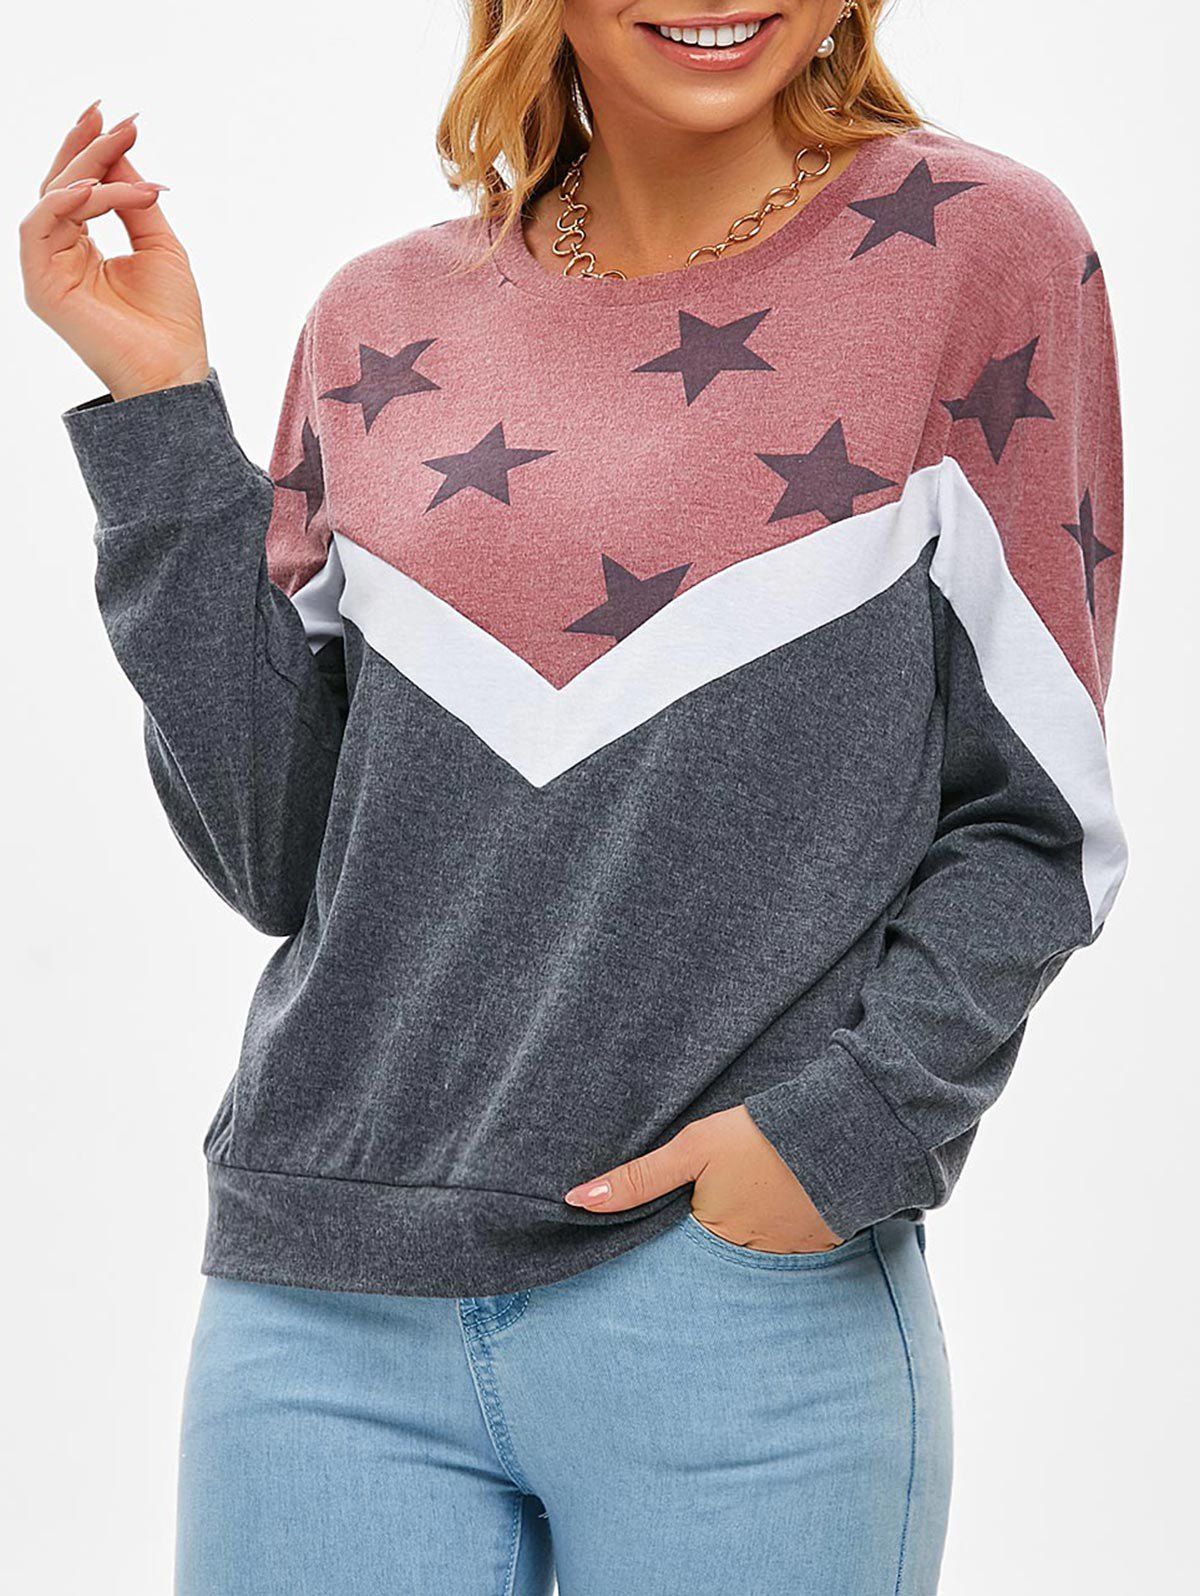 Outfit Star Colorblock Jersey Knit Casual Sweatshirt  